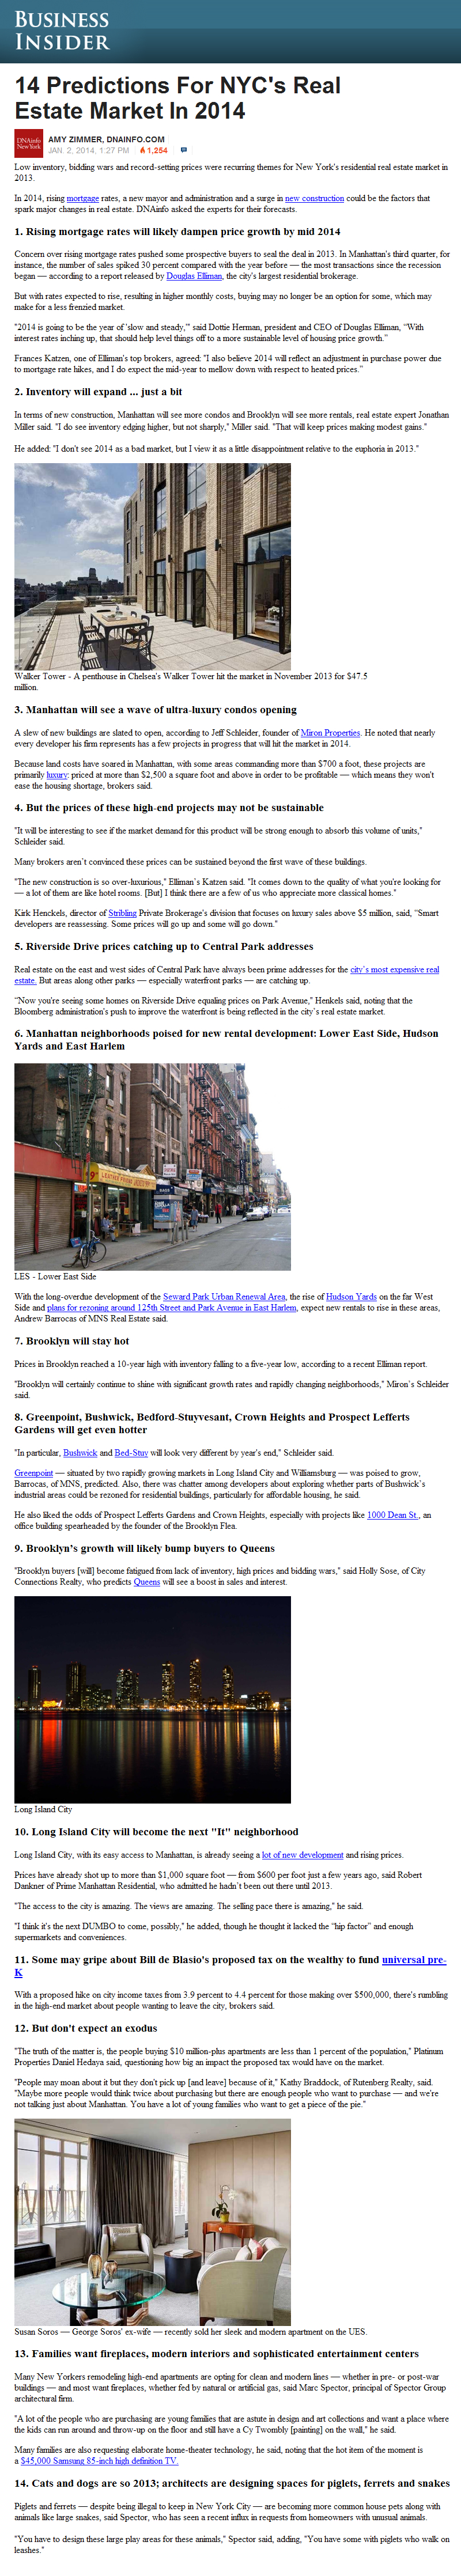 14 Predictions for NYC's Real Estate Market in 2014 part 1